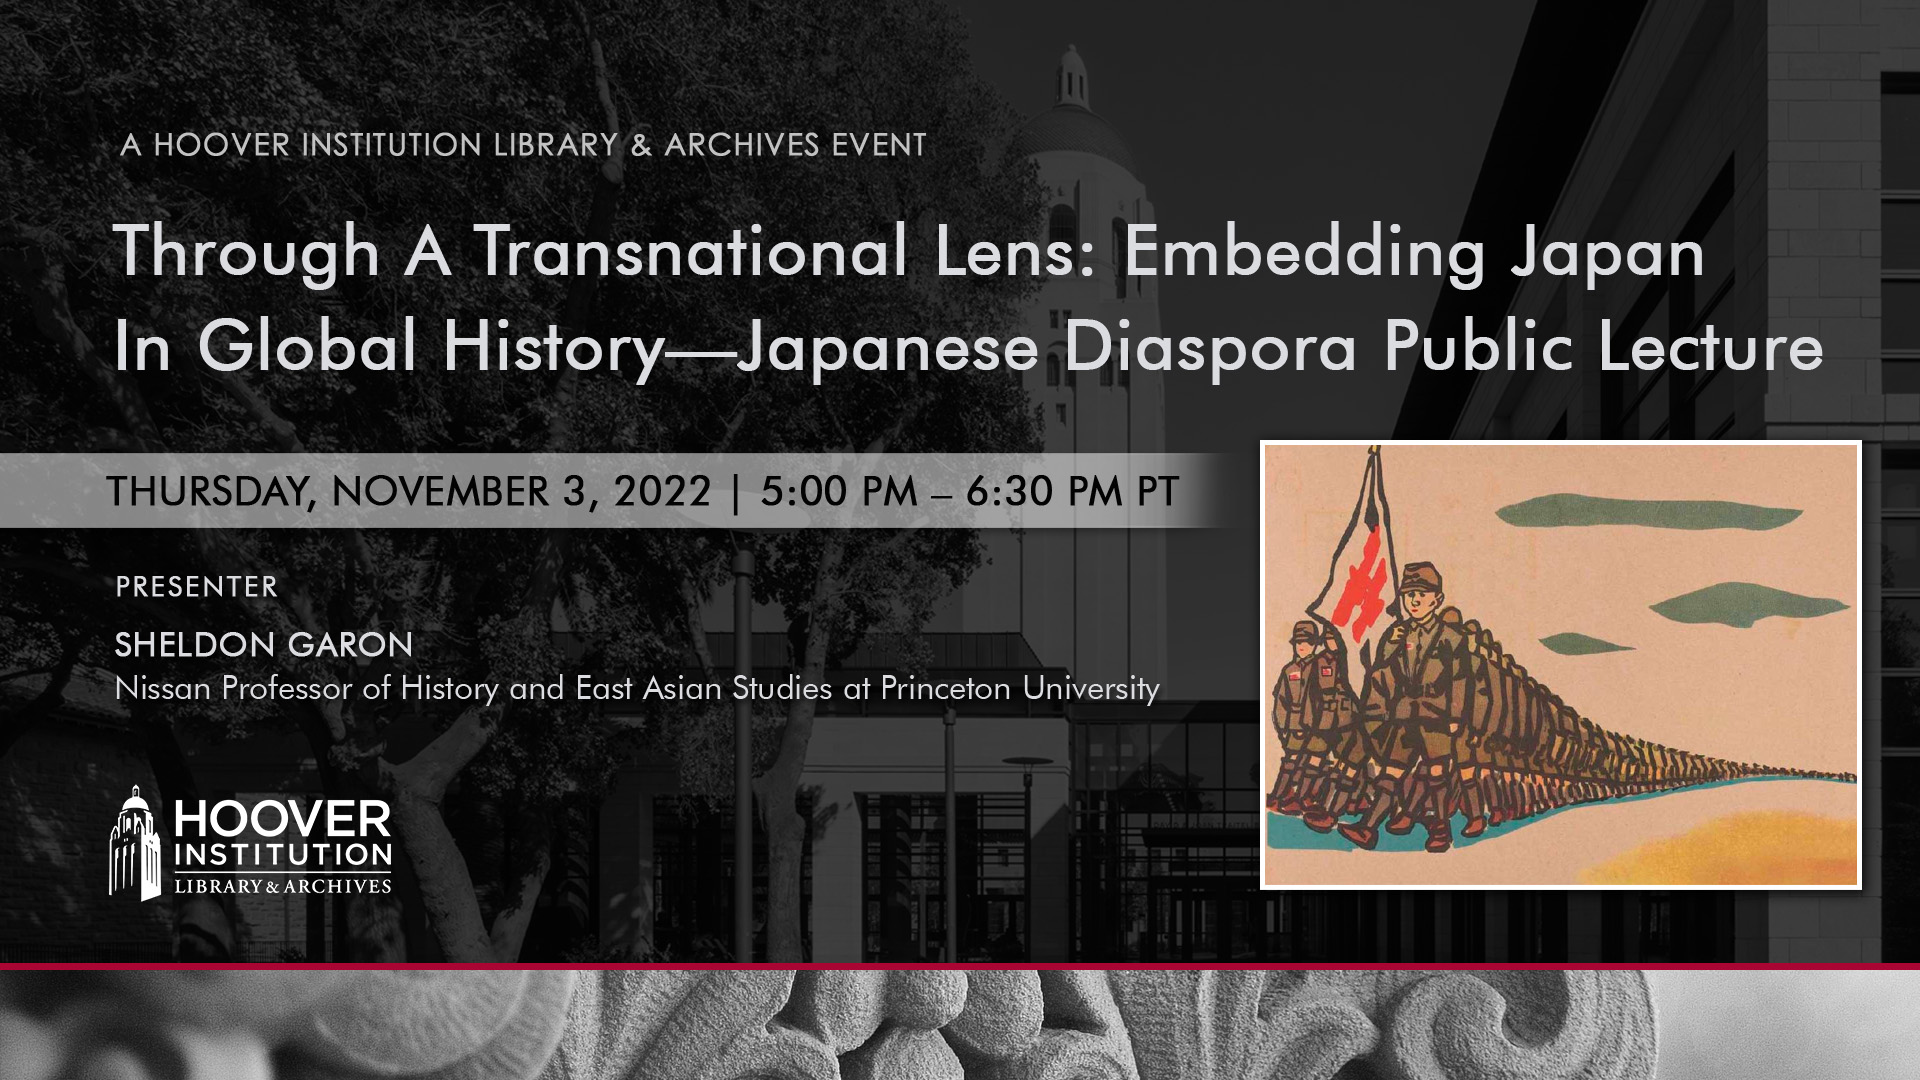 Through A Transnational Lens: Embedding Japan In Global History—Japanese Diaspora Public Lecture